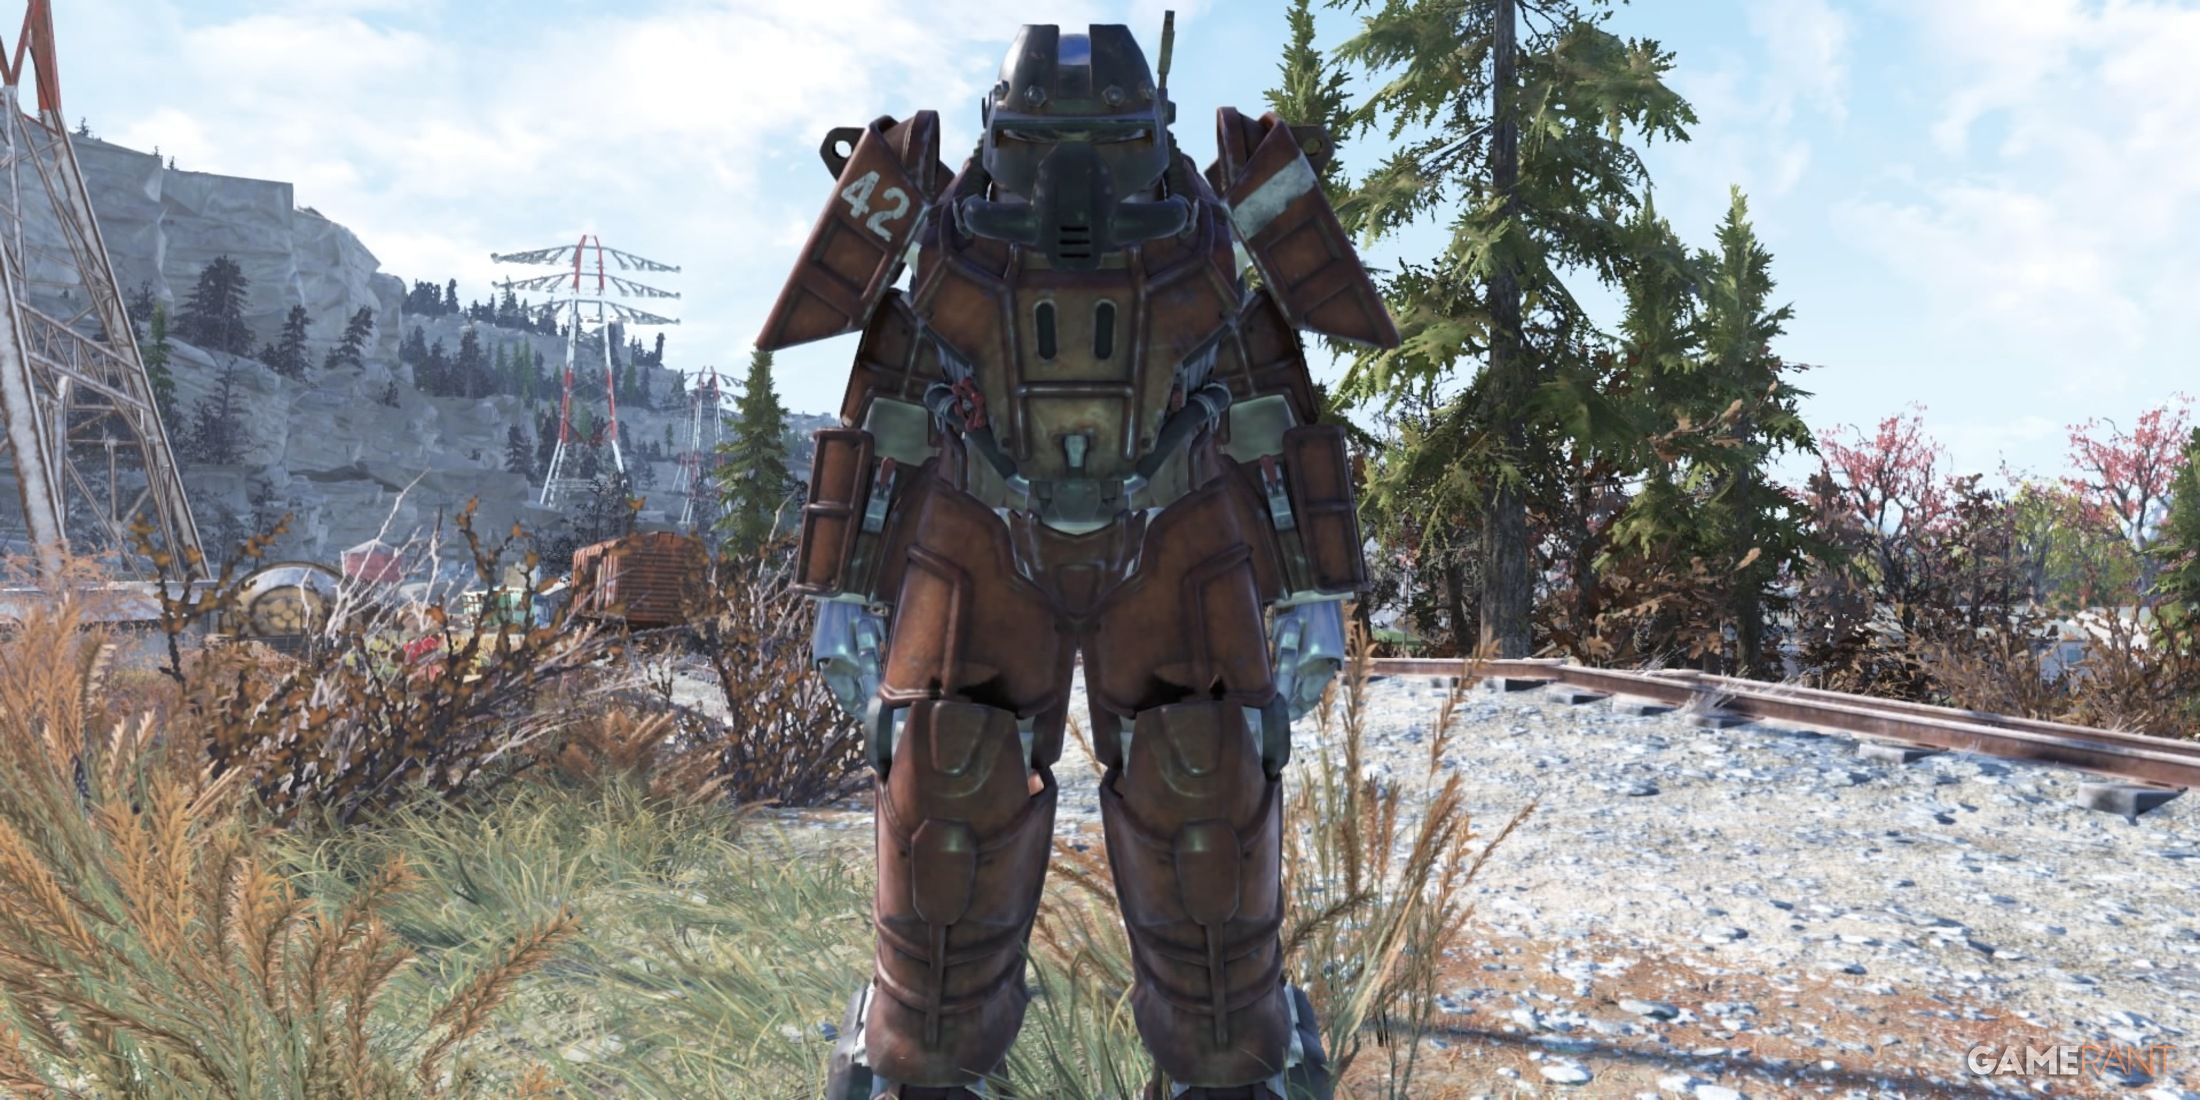 Union Power Armor Set in Fallout 76